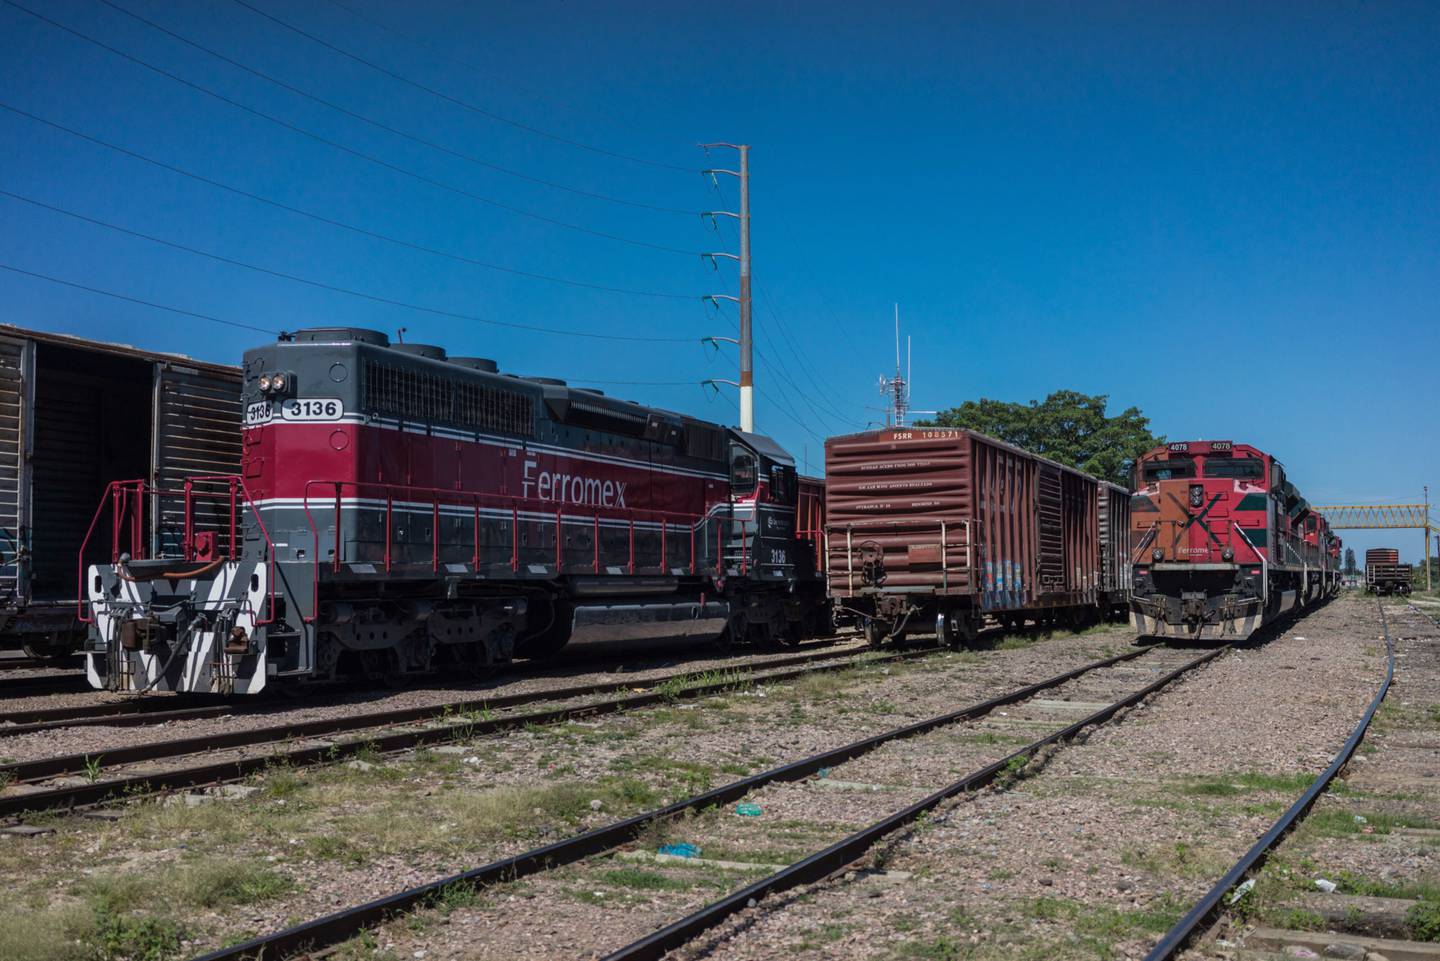 Grupo Mexico Transportes SA Ferrocarril Mexicano (Ferromex) freight trains sit parked at a yard in Tepic, Nayarit State, Mexico.dfd